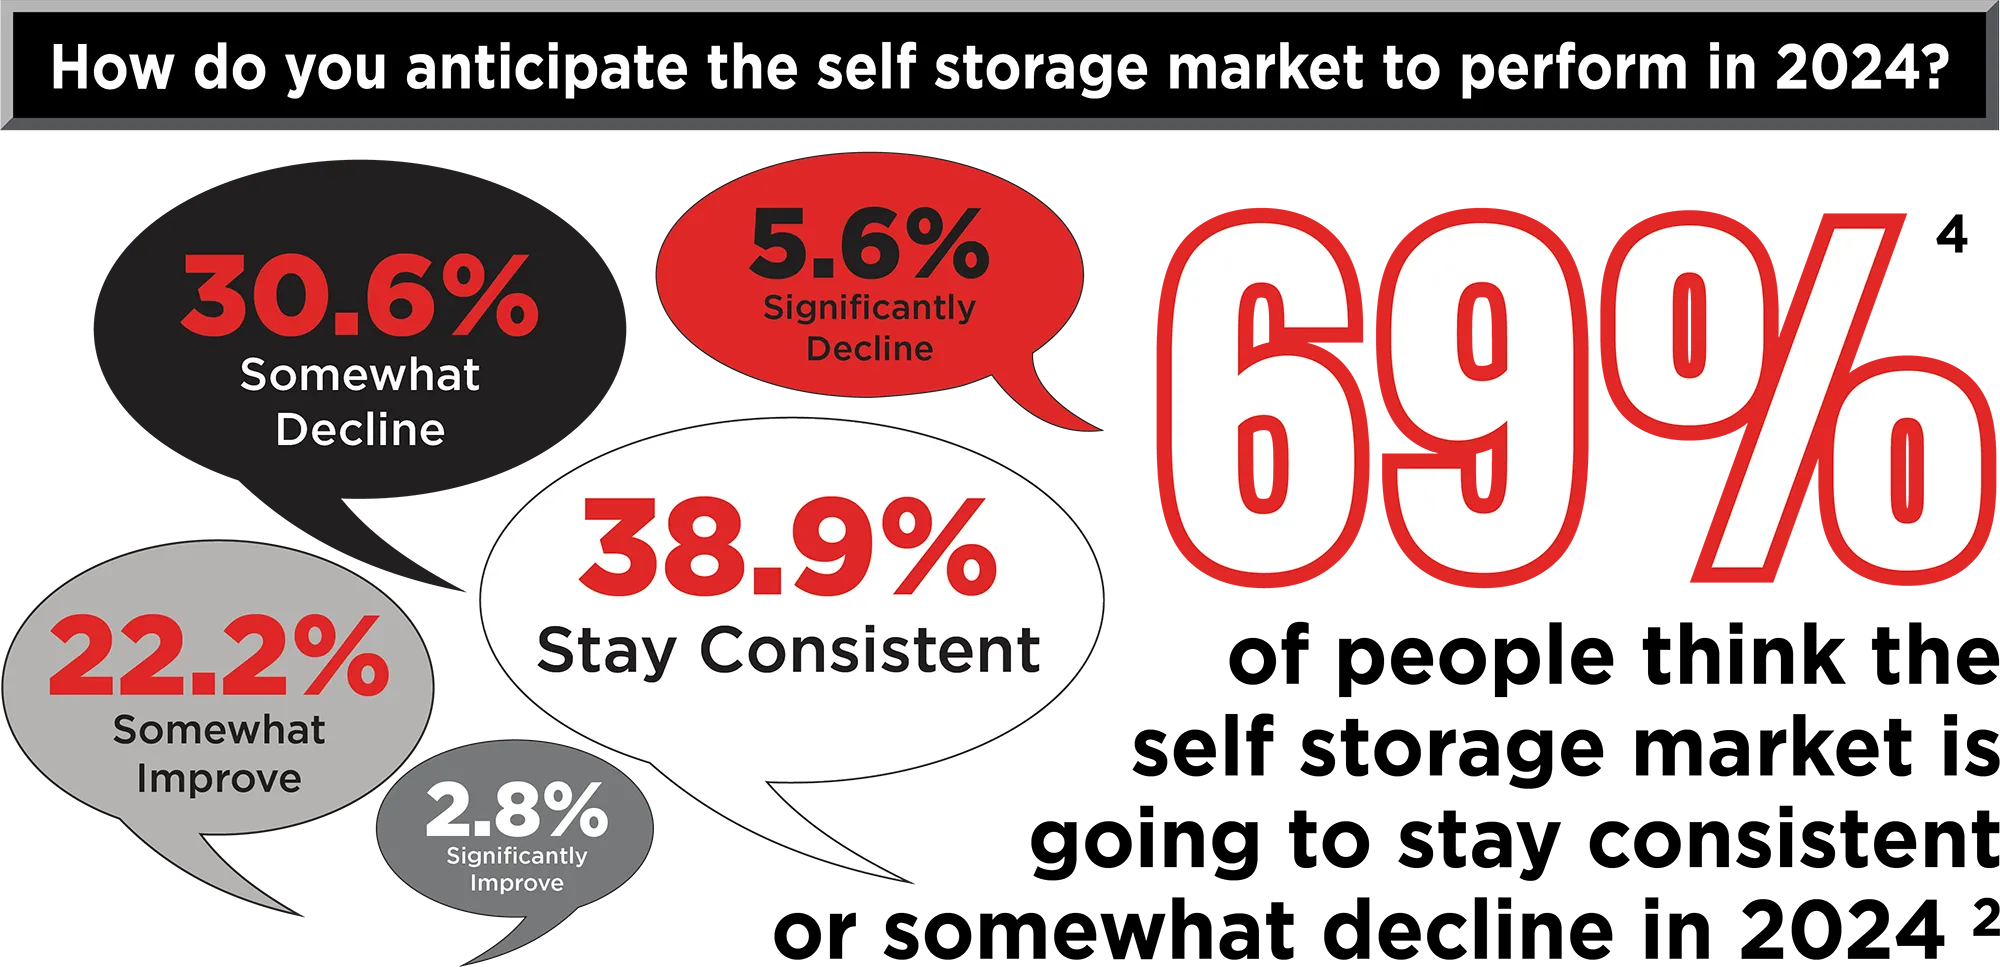 69% of people think the self storage market is going to stay consistent or somewhat decline in 2024; 38.9% stay consistent; 30.6% somewhat decline; 22.2% somewhat improve; 5.6% significantly decline; 2.8% significantly improve